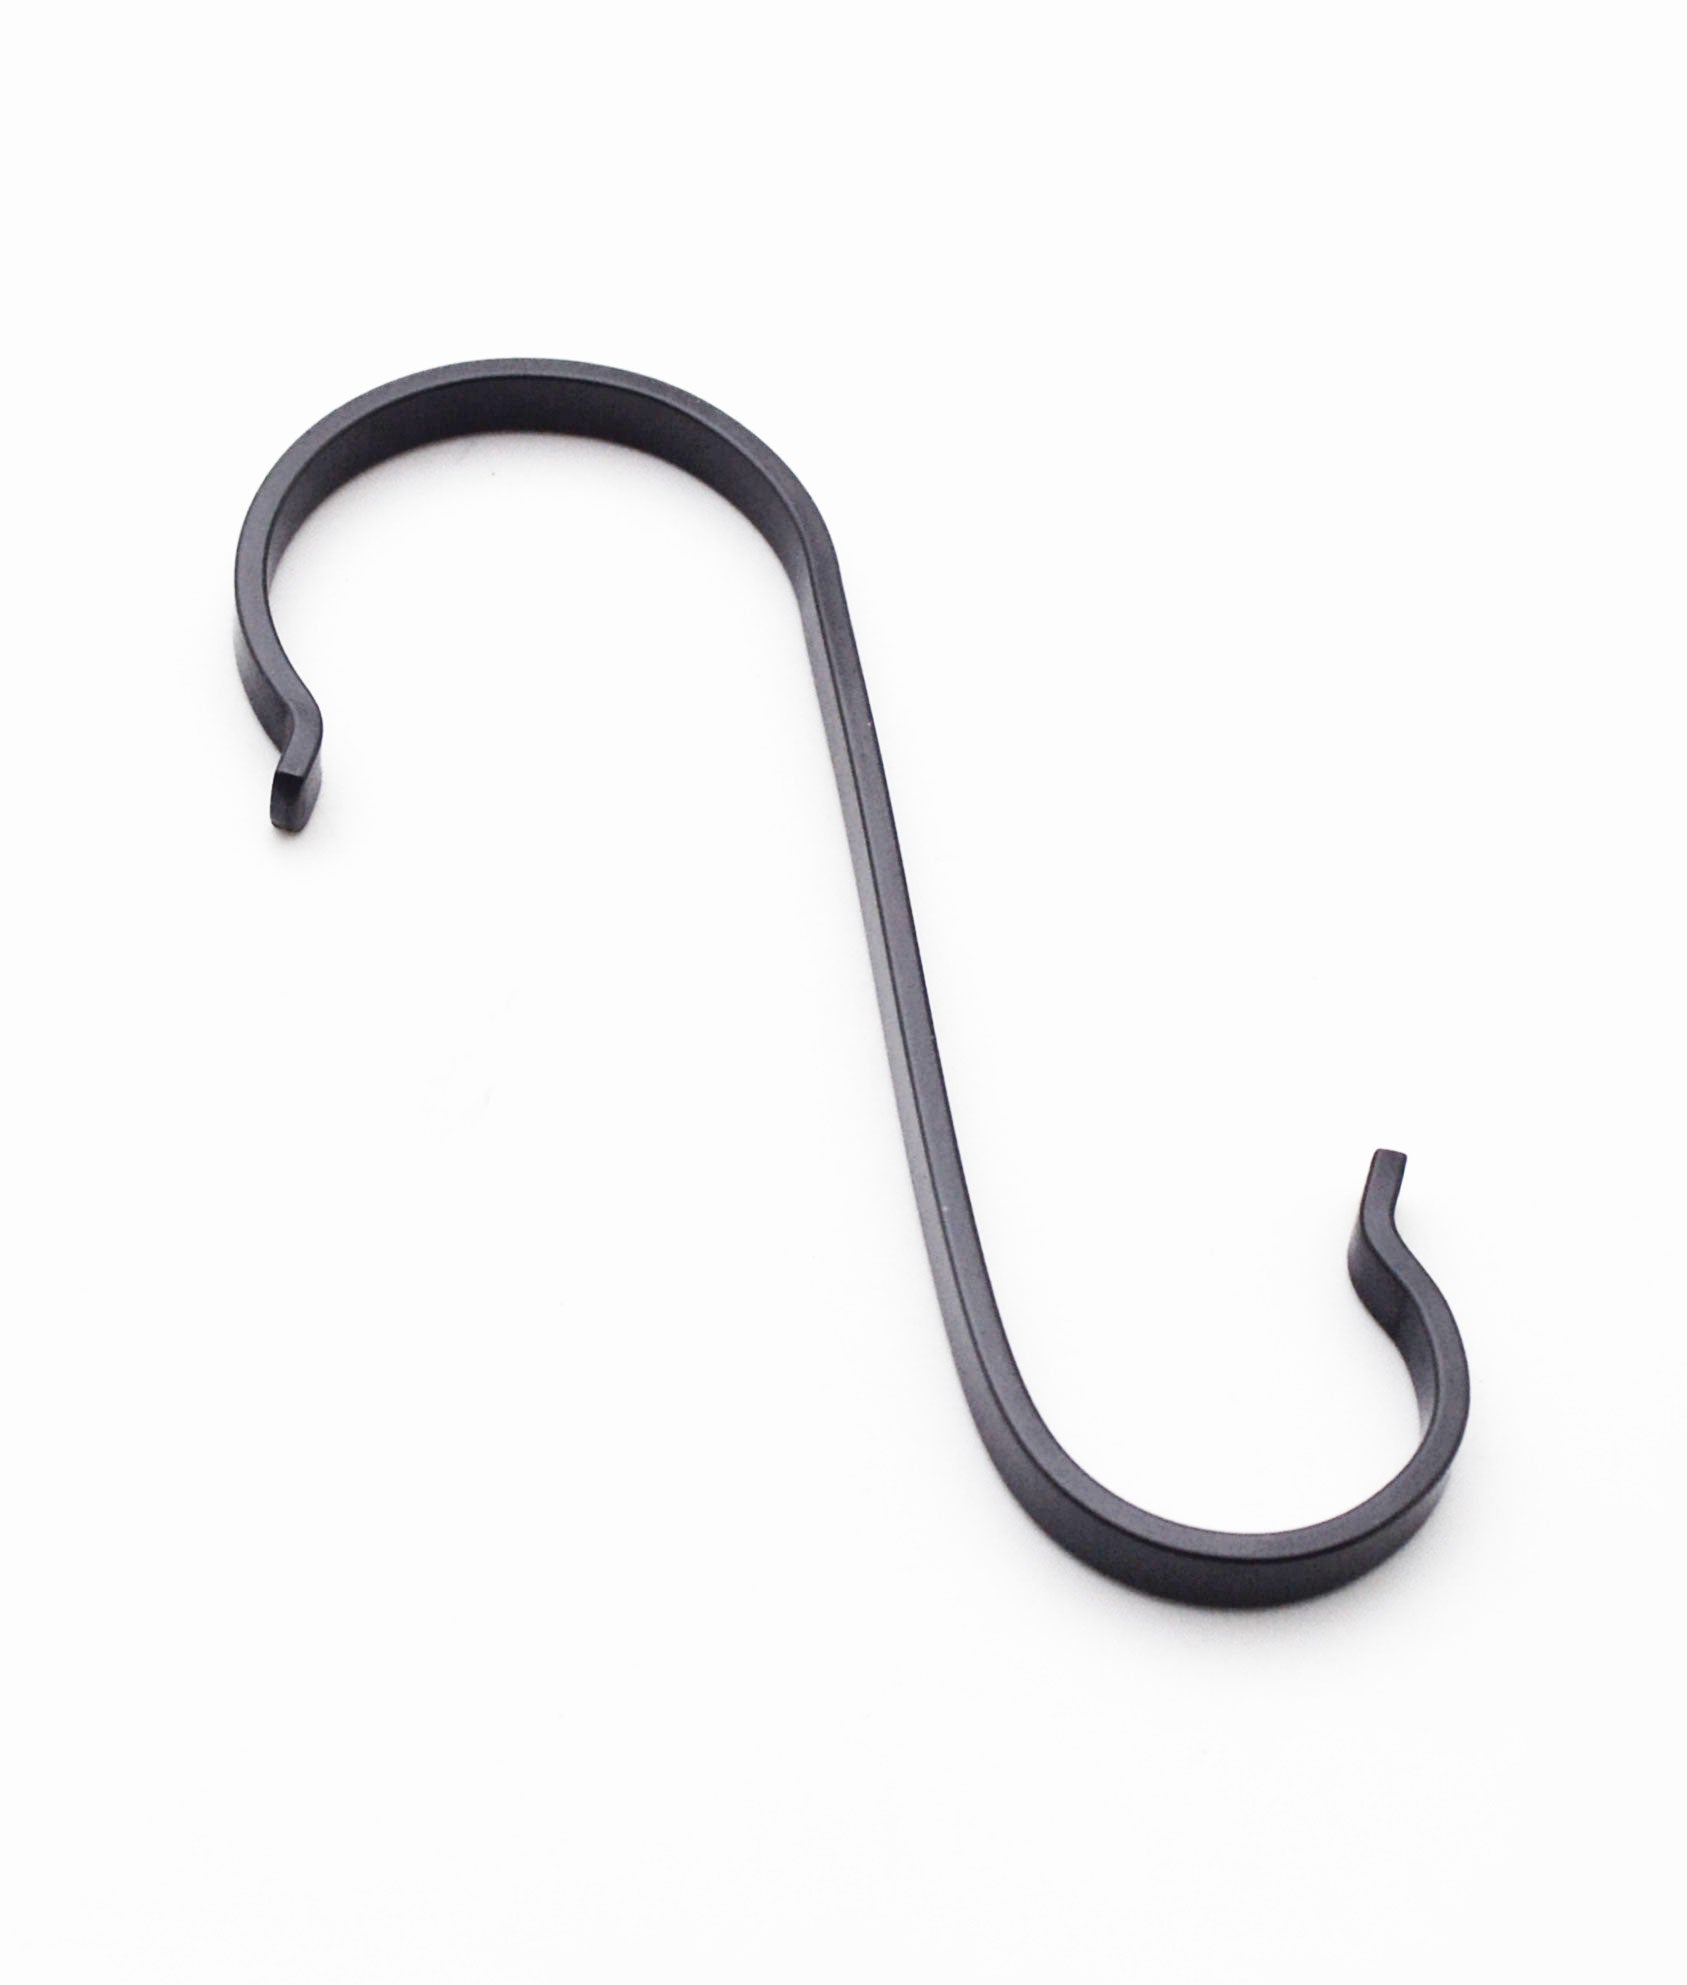 S' Shaped Kitchen Hanging Hook for 19mm Rail